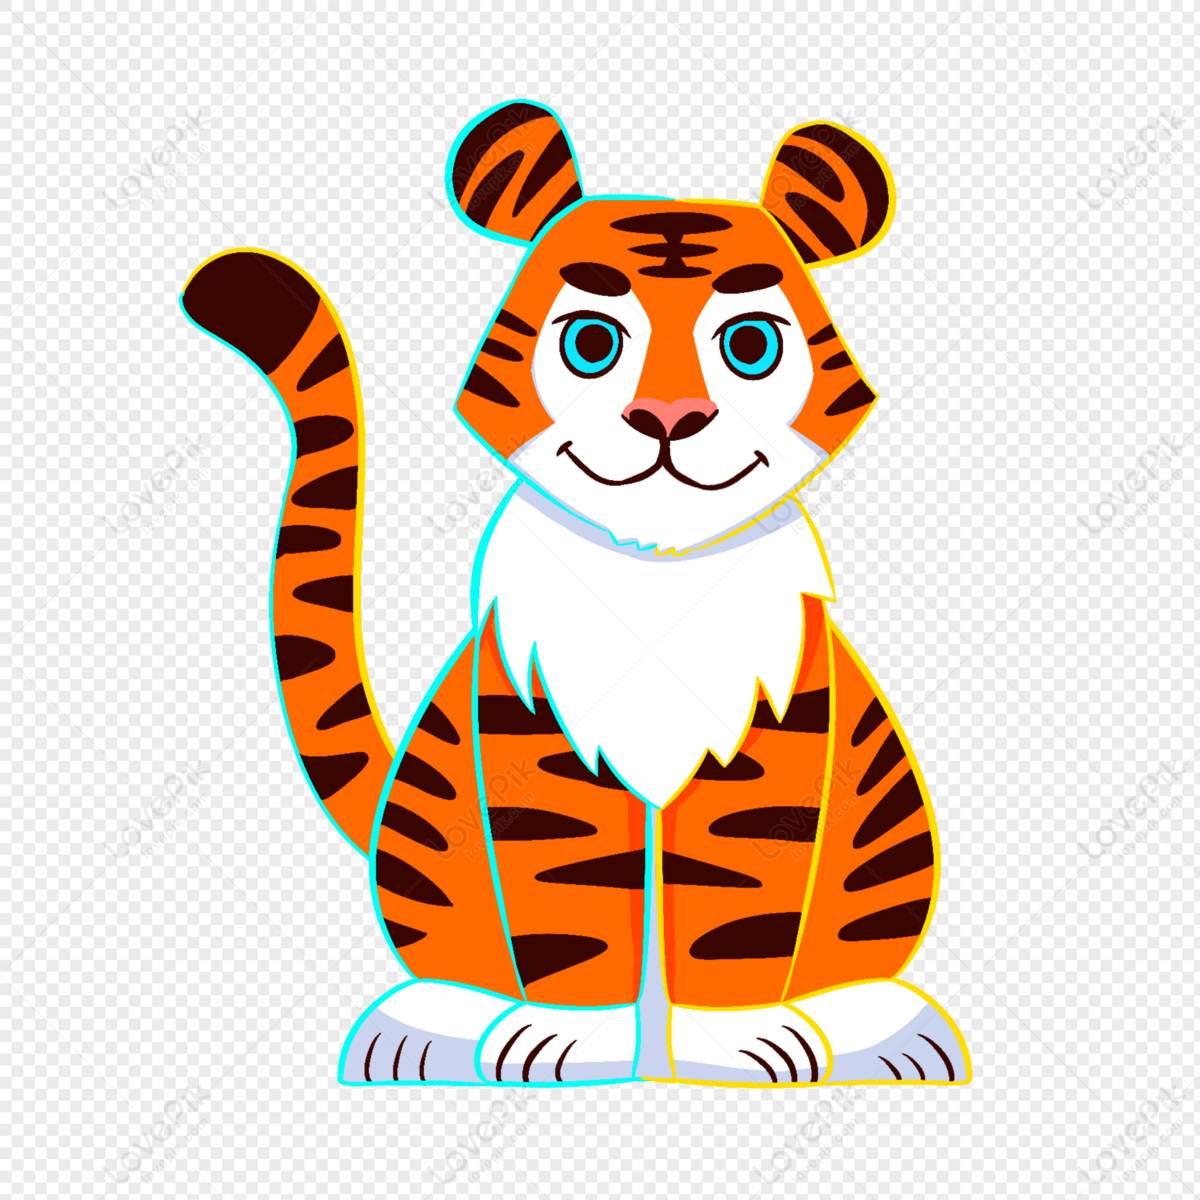 Hand Drawn Cartoon Tiger PNG Image Free Download And Clipart Image For Free  Download - Lovepik | 402017621